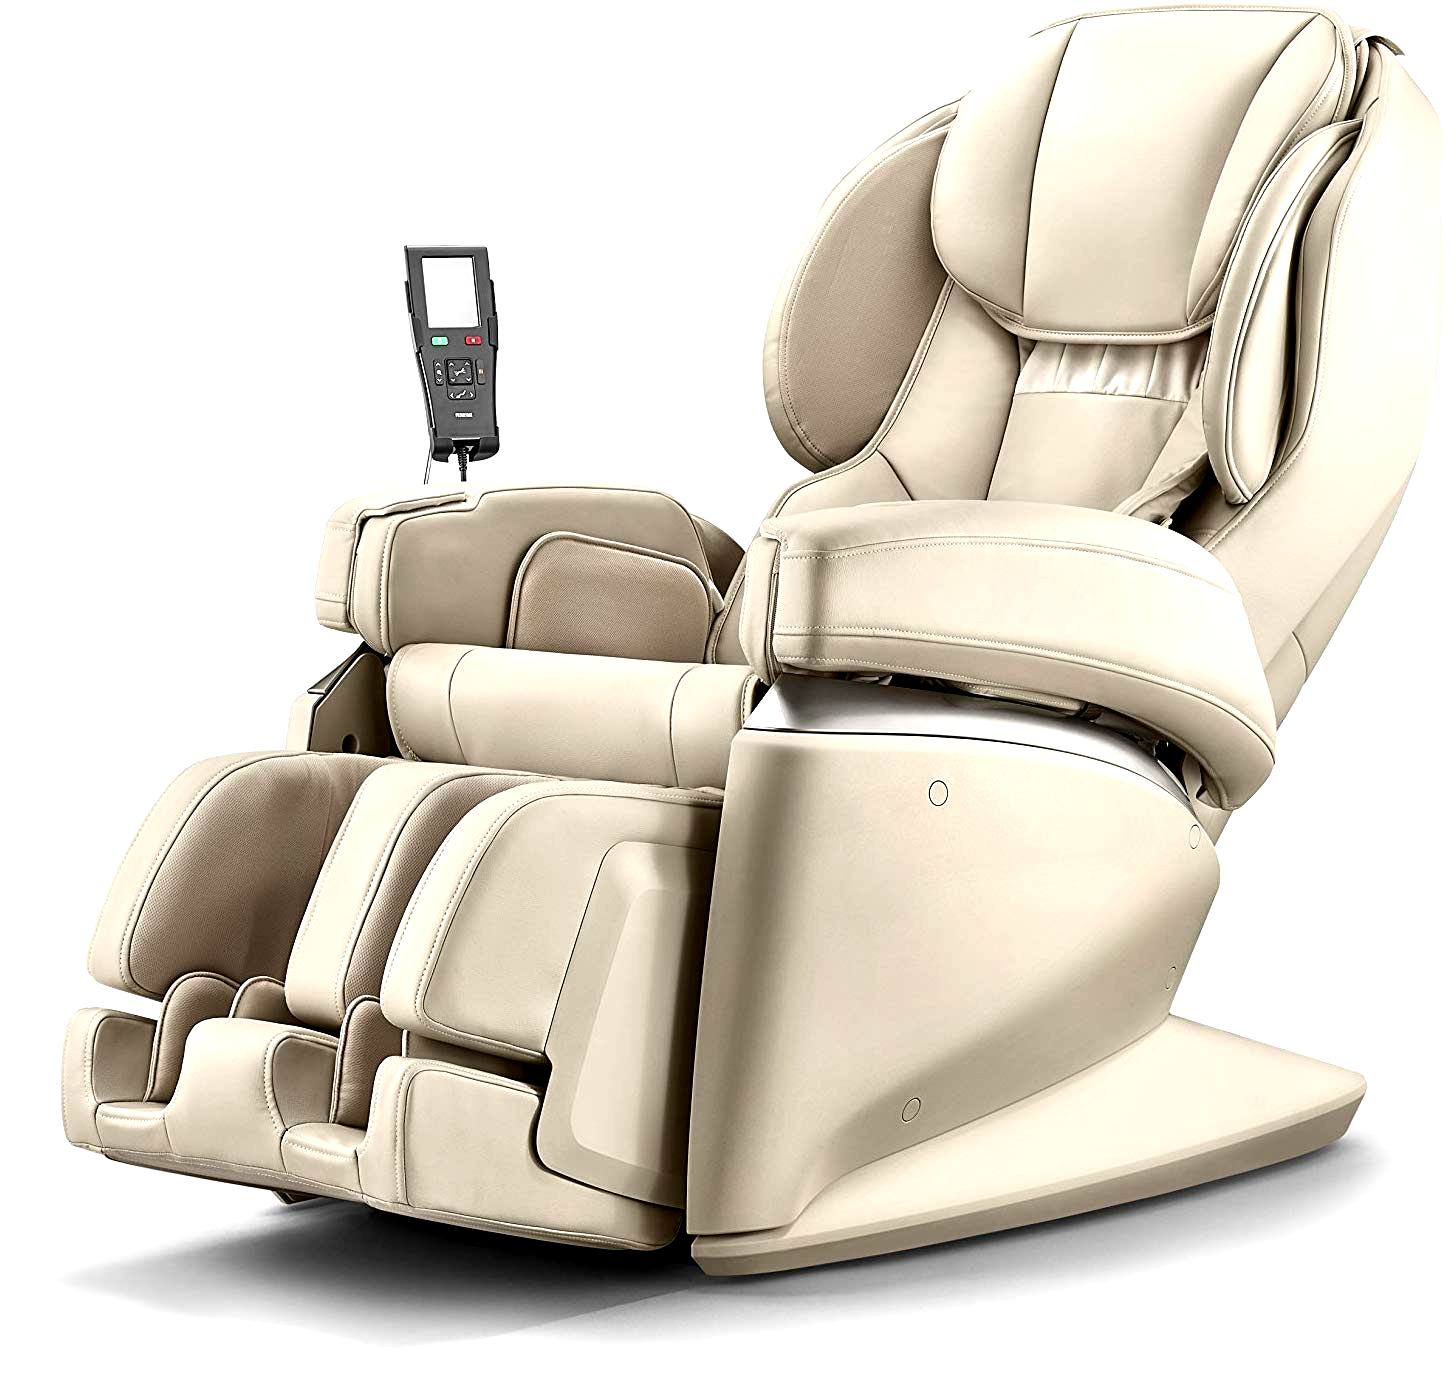 5 Best Japanese Massage Chairs 2022 Review 1 Top Brand